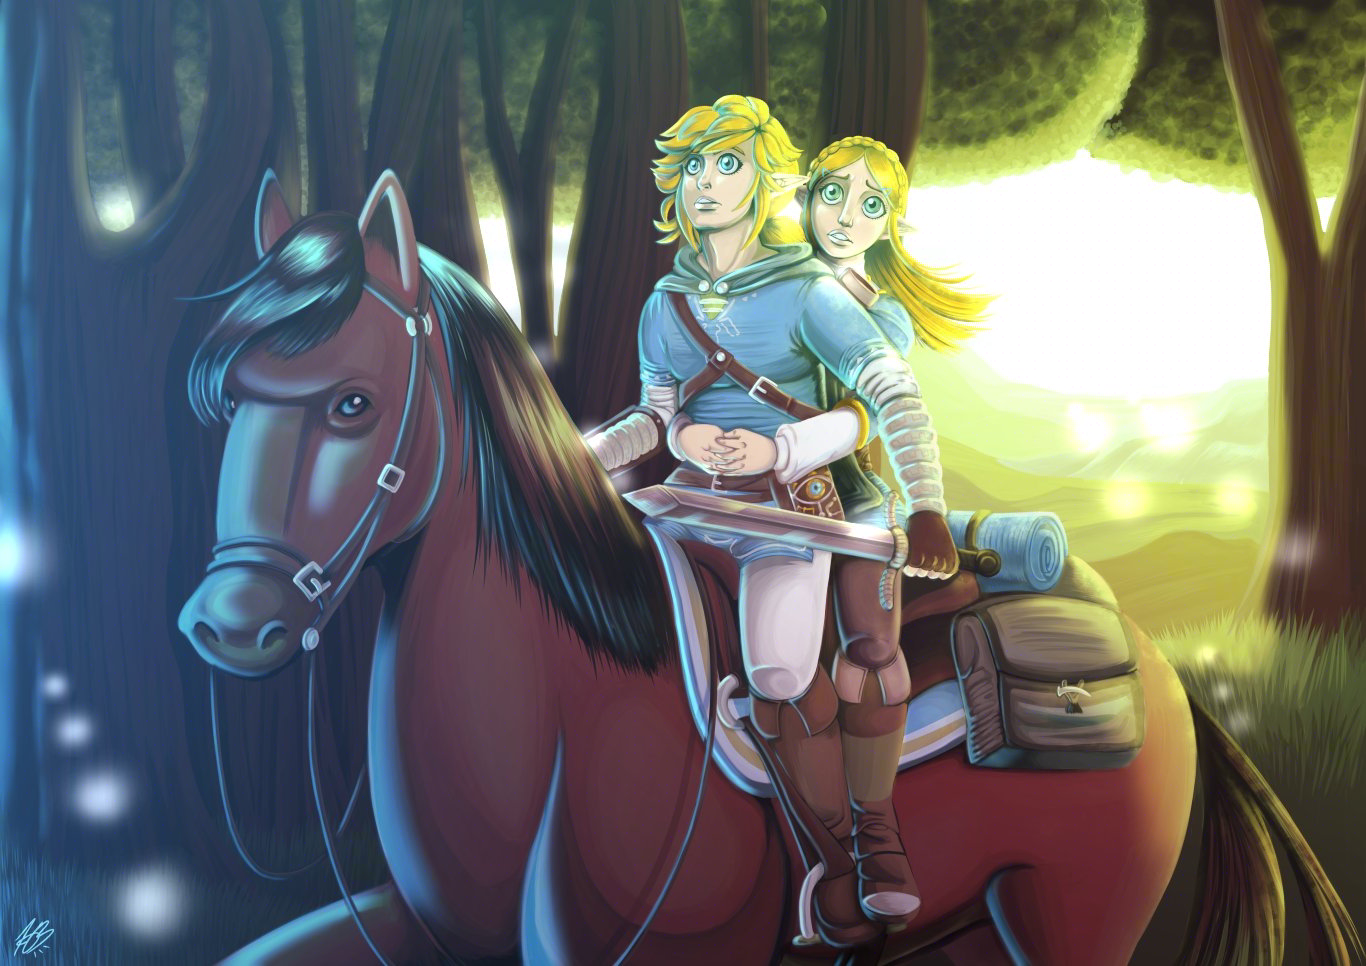 Digital painting of Link and Zelda riding on a horse from Breath Of The Wild. They are entering a forest and are looking towards a blue light. Link holds a sword in his hand with Zelda is holding onto him, sitting behind him. They both look a mix of awestruck and concerned.